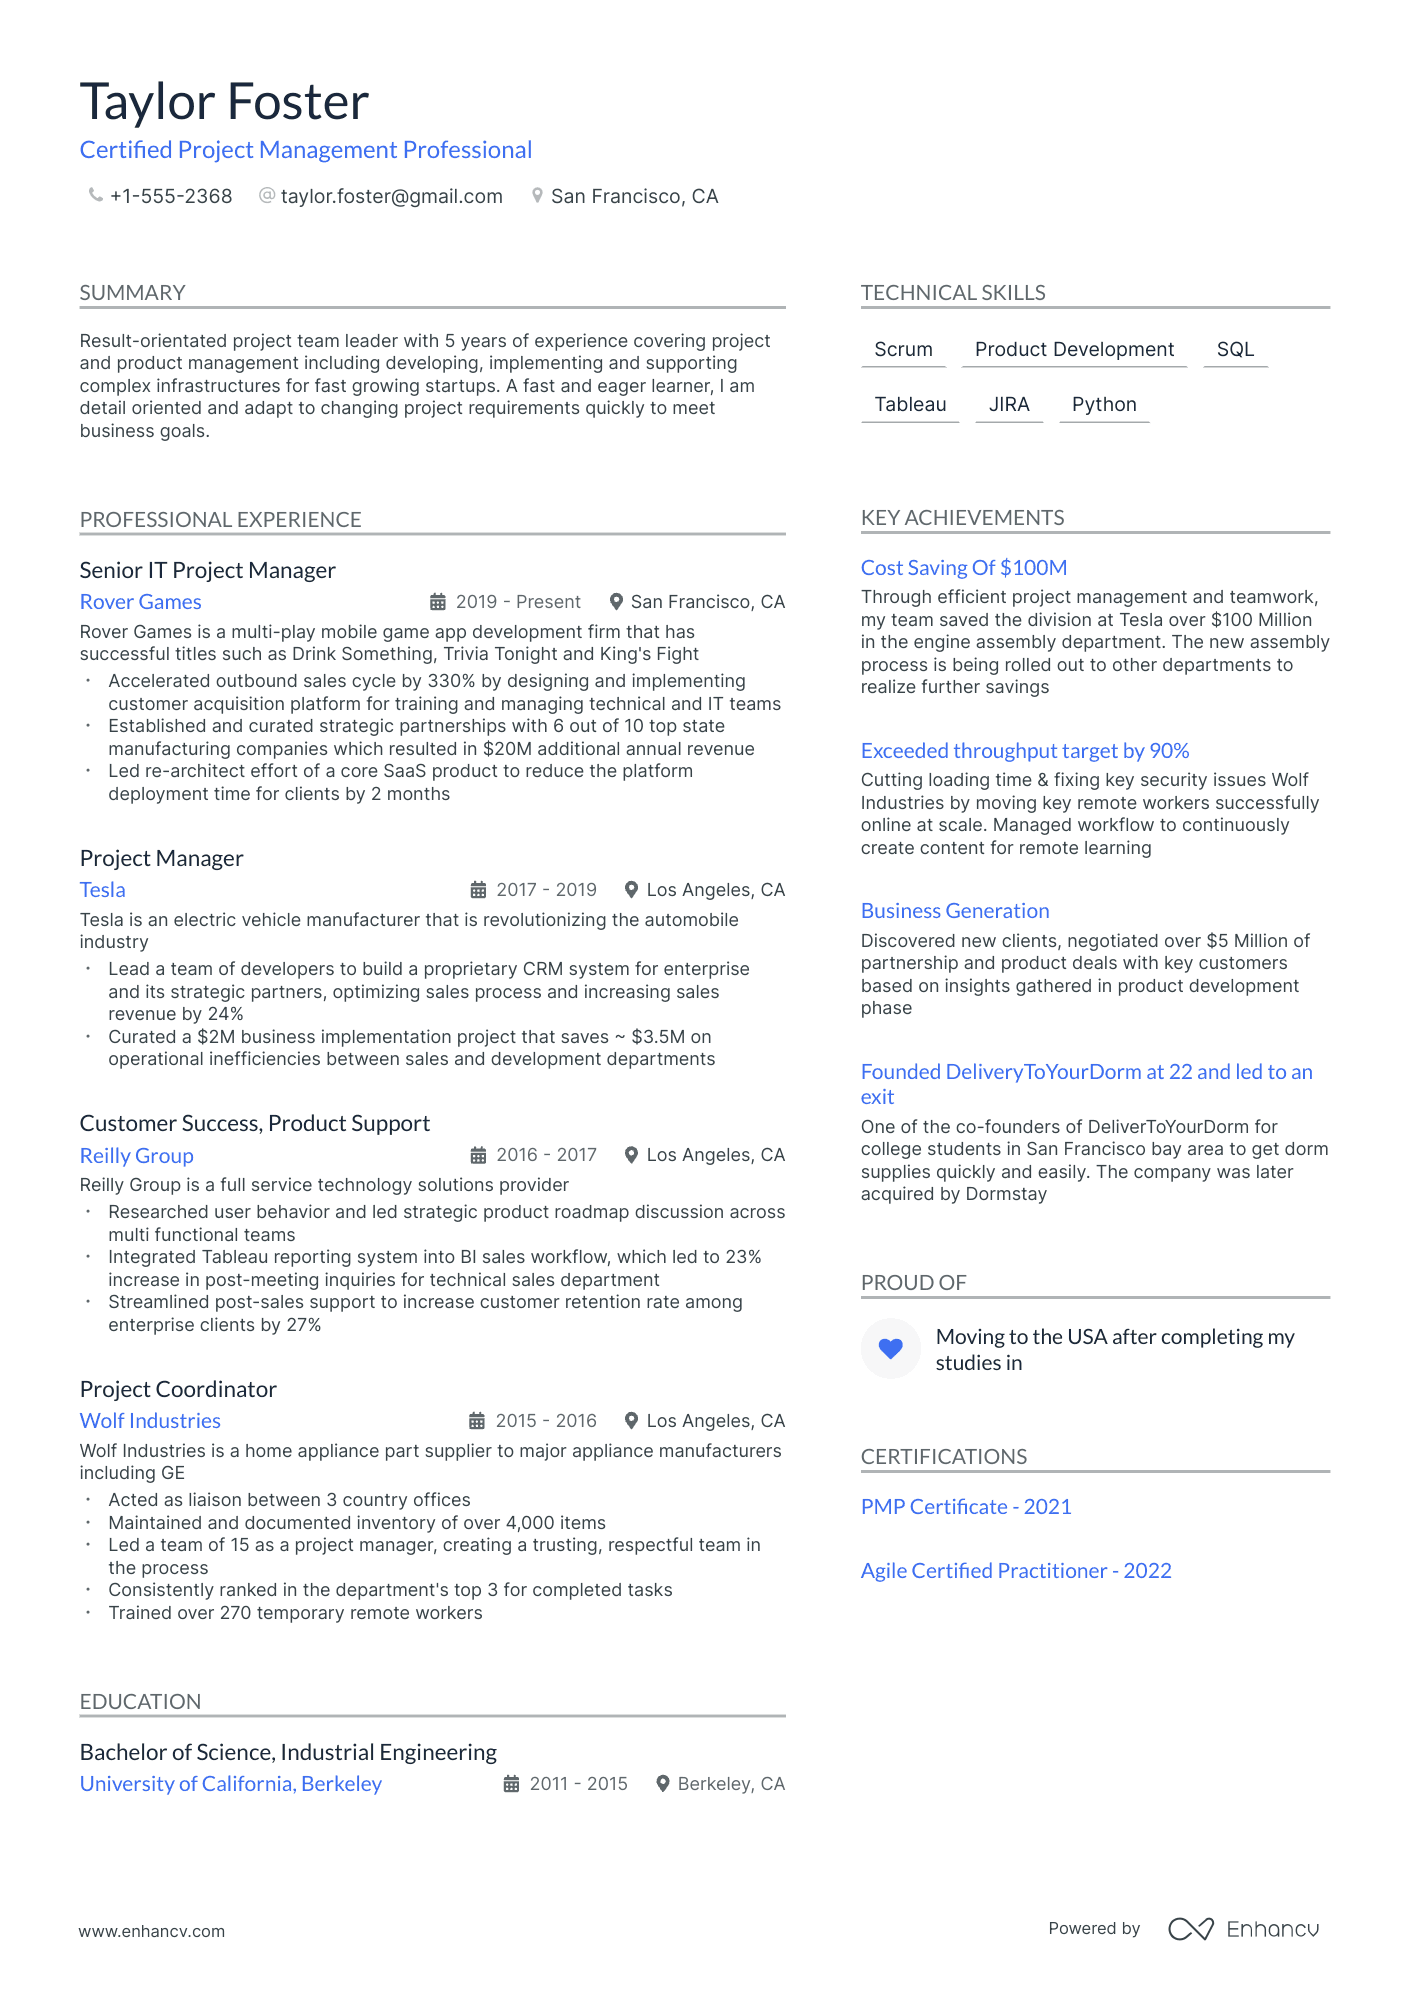 Certified Project Management Professional resume example